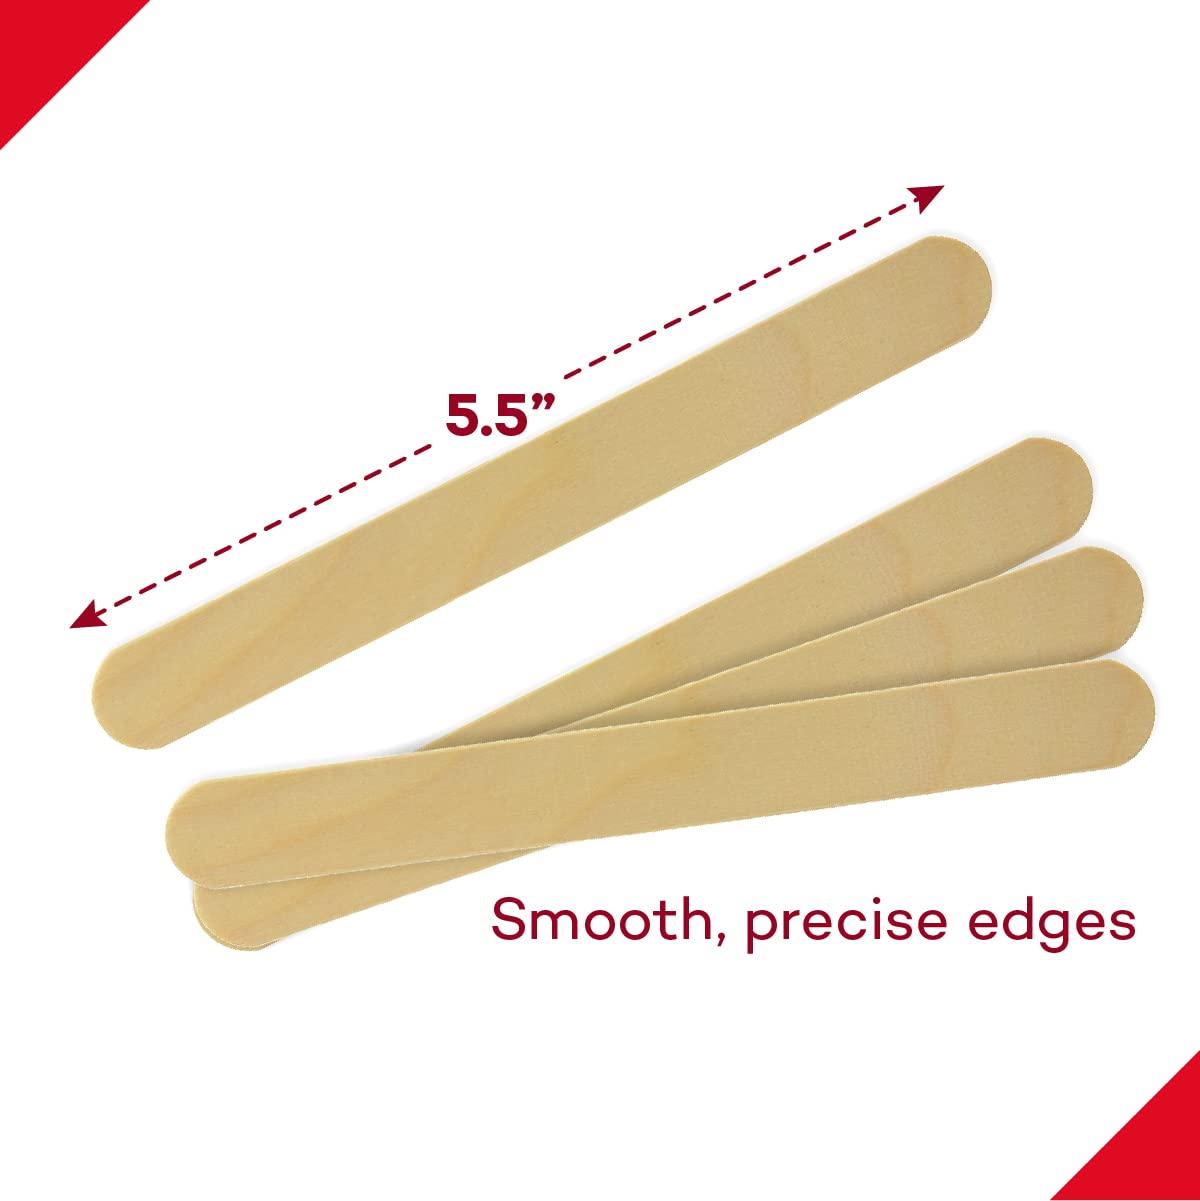  Dealmed 5.5” Junior Tongue Depressors – 500 Non-Sterile Wood Tongue  Depressor Sticks, Can Be Used as Tongue Depressors for Crafts, in Medical  Practice, Emergency First Aid Kits and More : Industrial